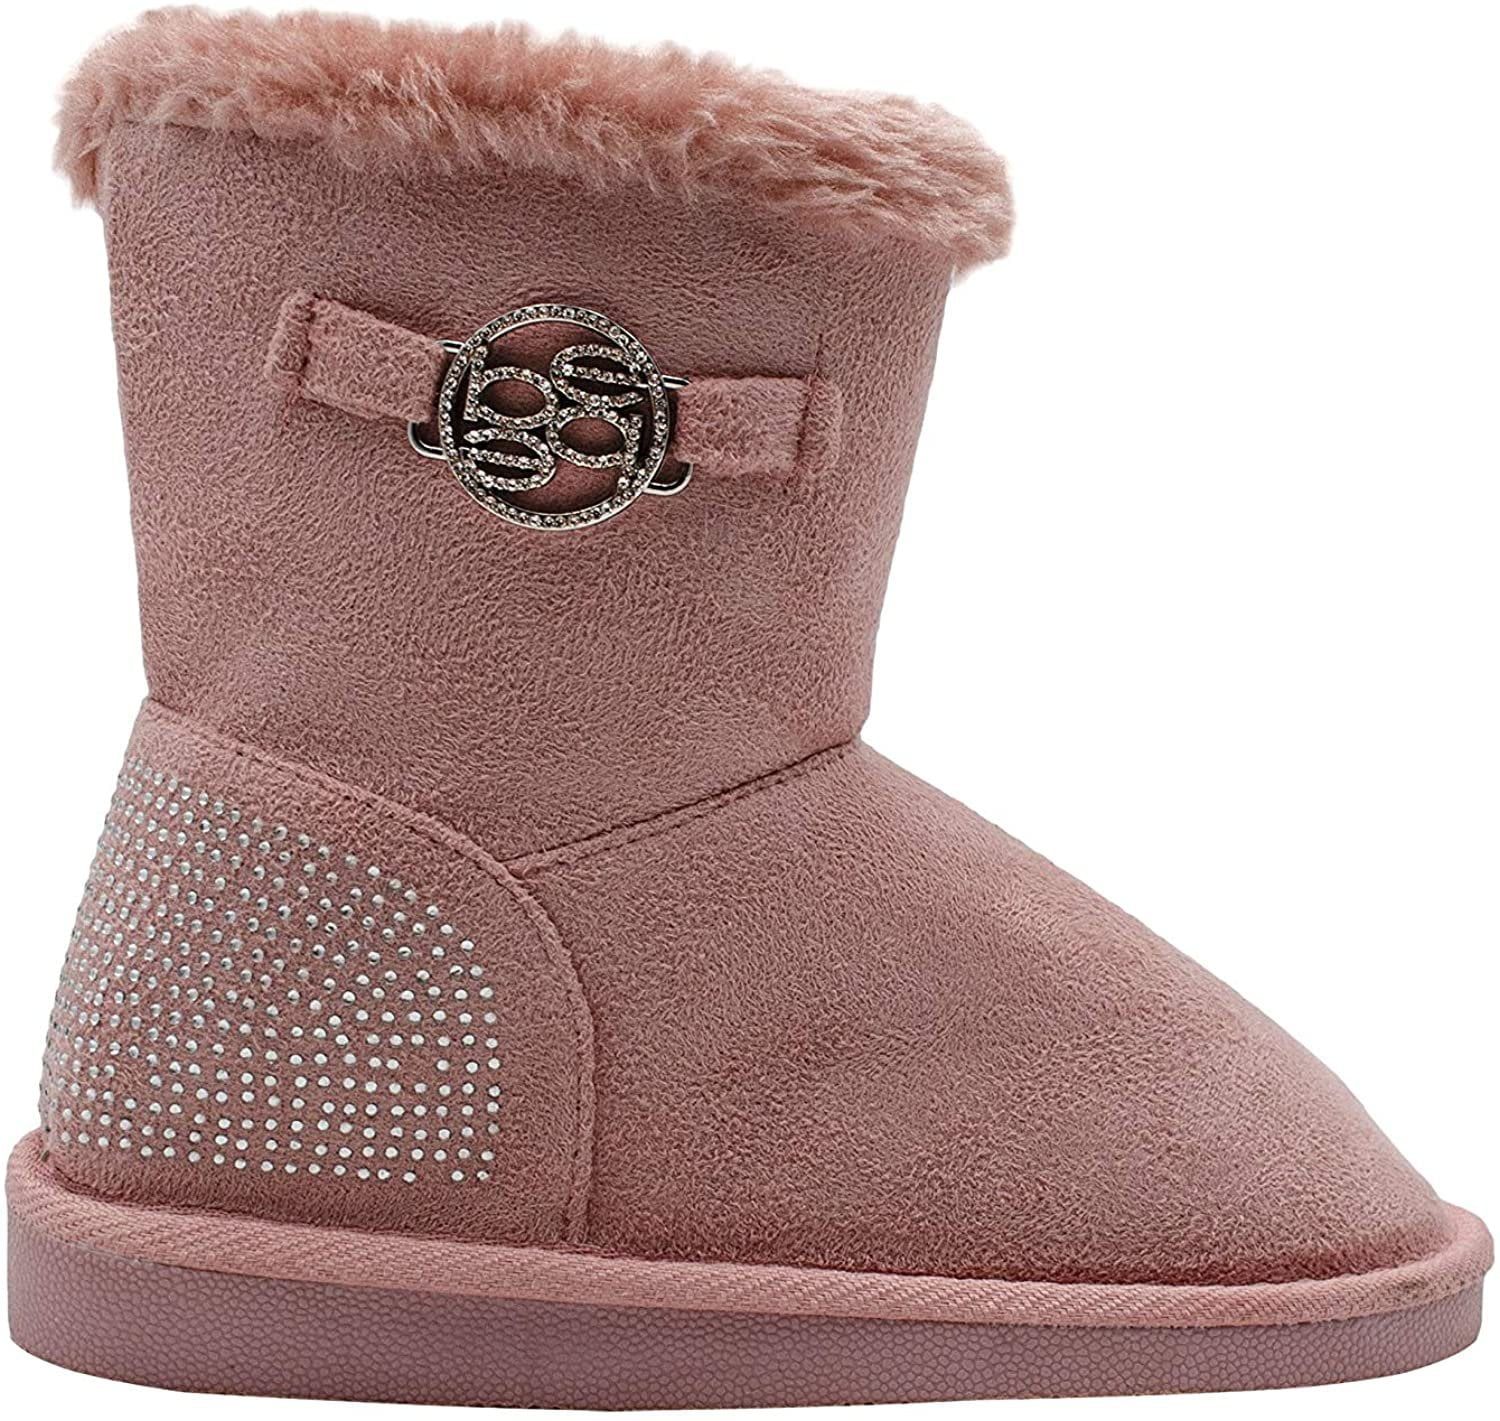 Details about   Women's Warm Snow Boots Thicken Fur Scrub Mid Calf Shoes Rhinestone Buckle Boots 